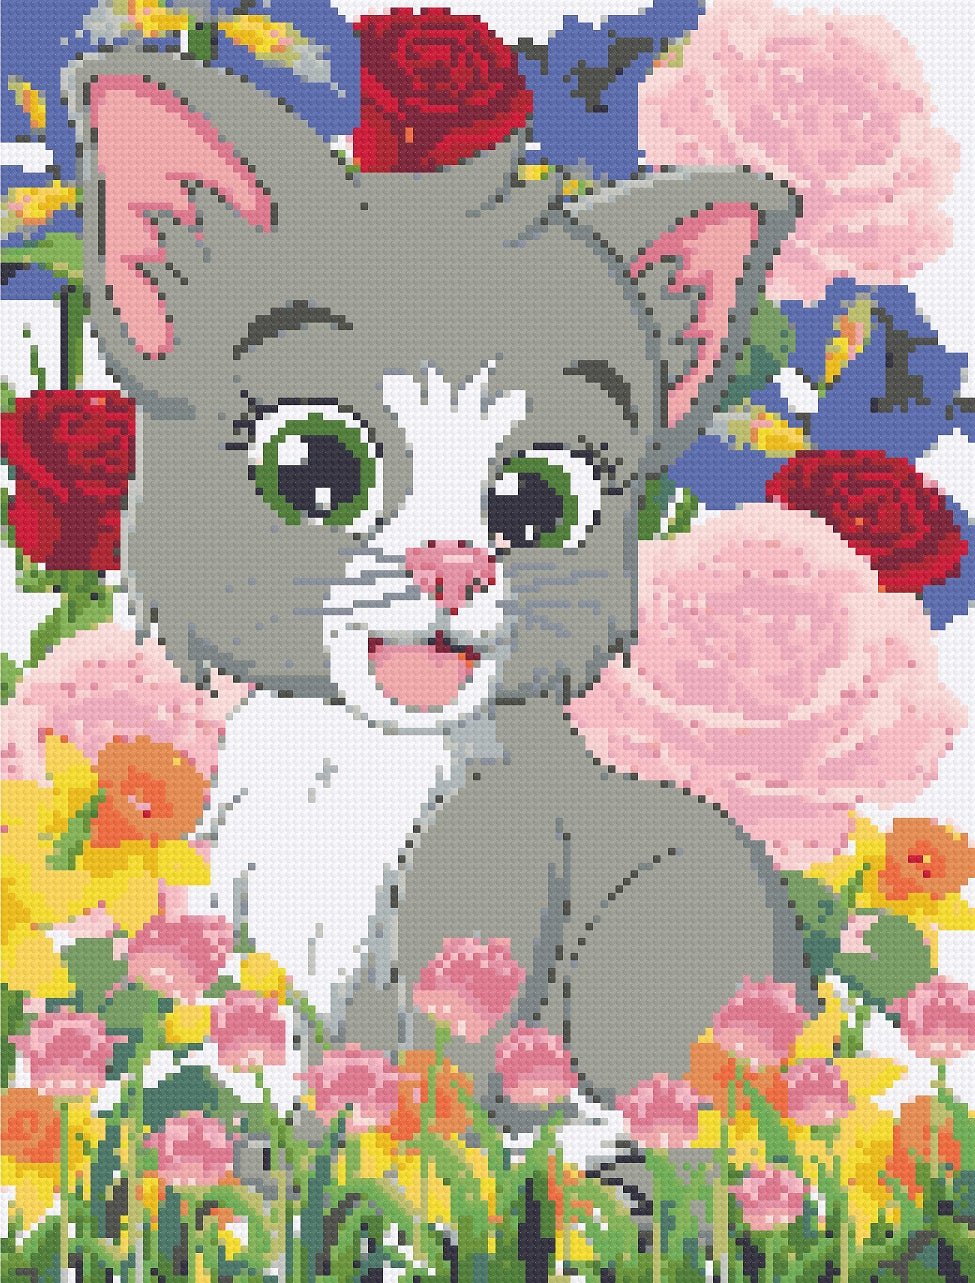 Kitty in the Garden Diamond Painting Kit - Art by Sals - A Homespun Hobby